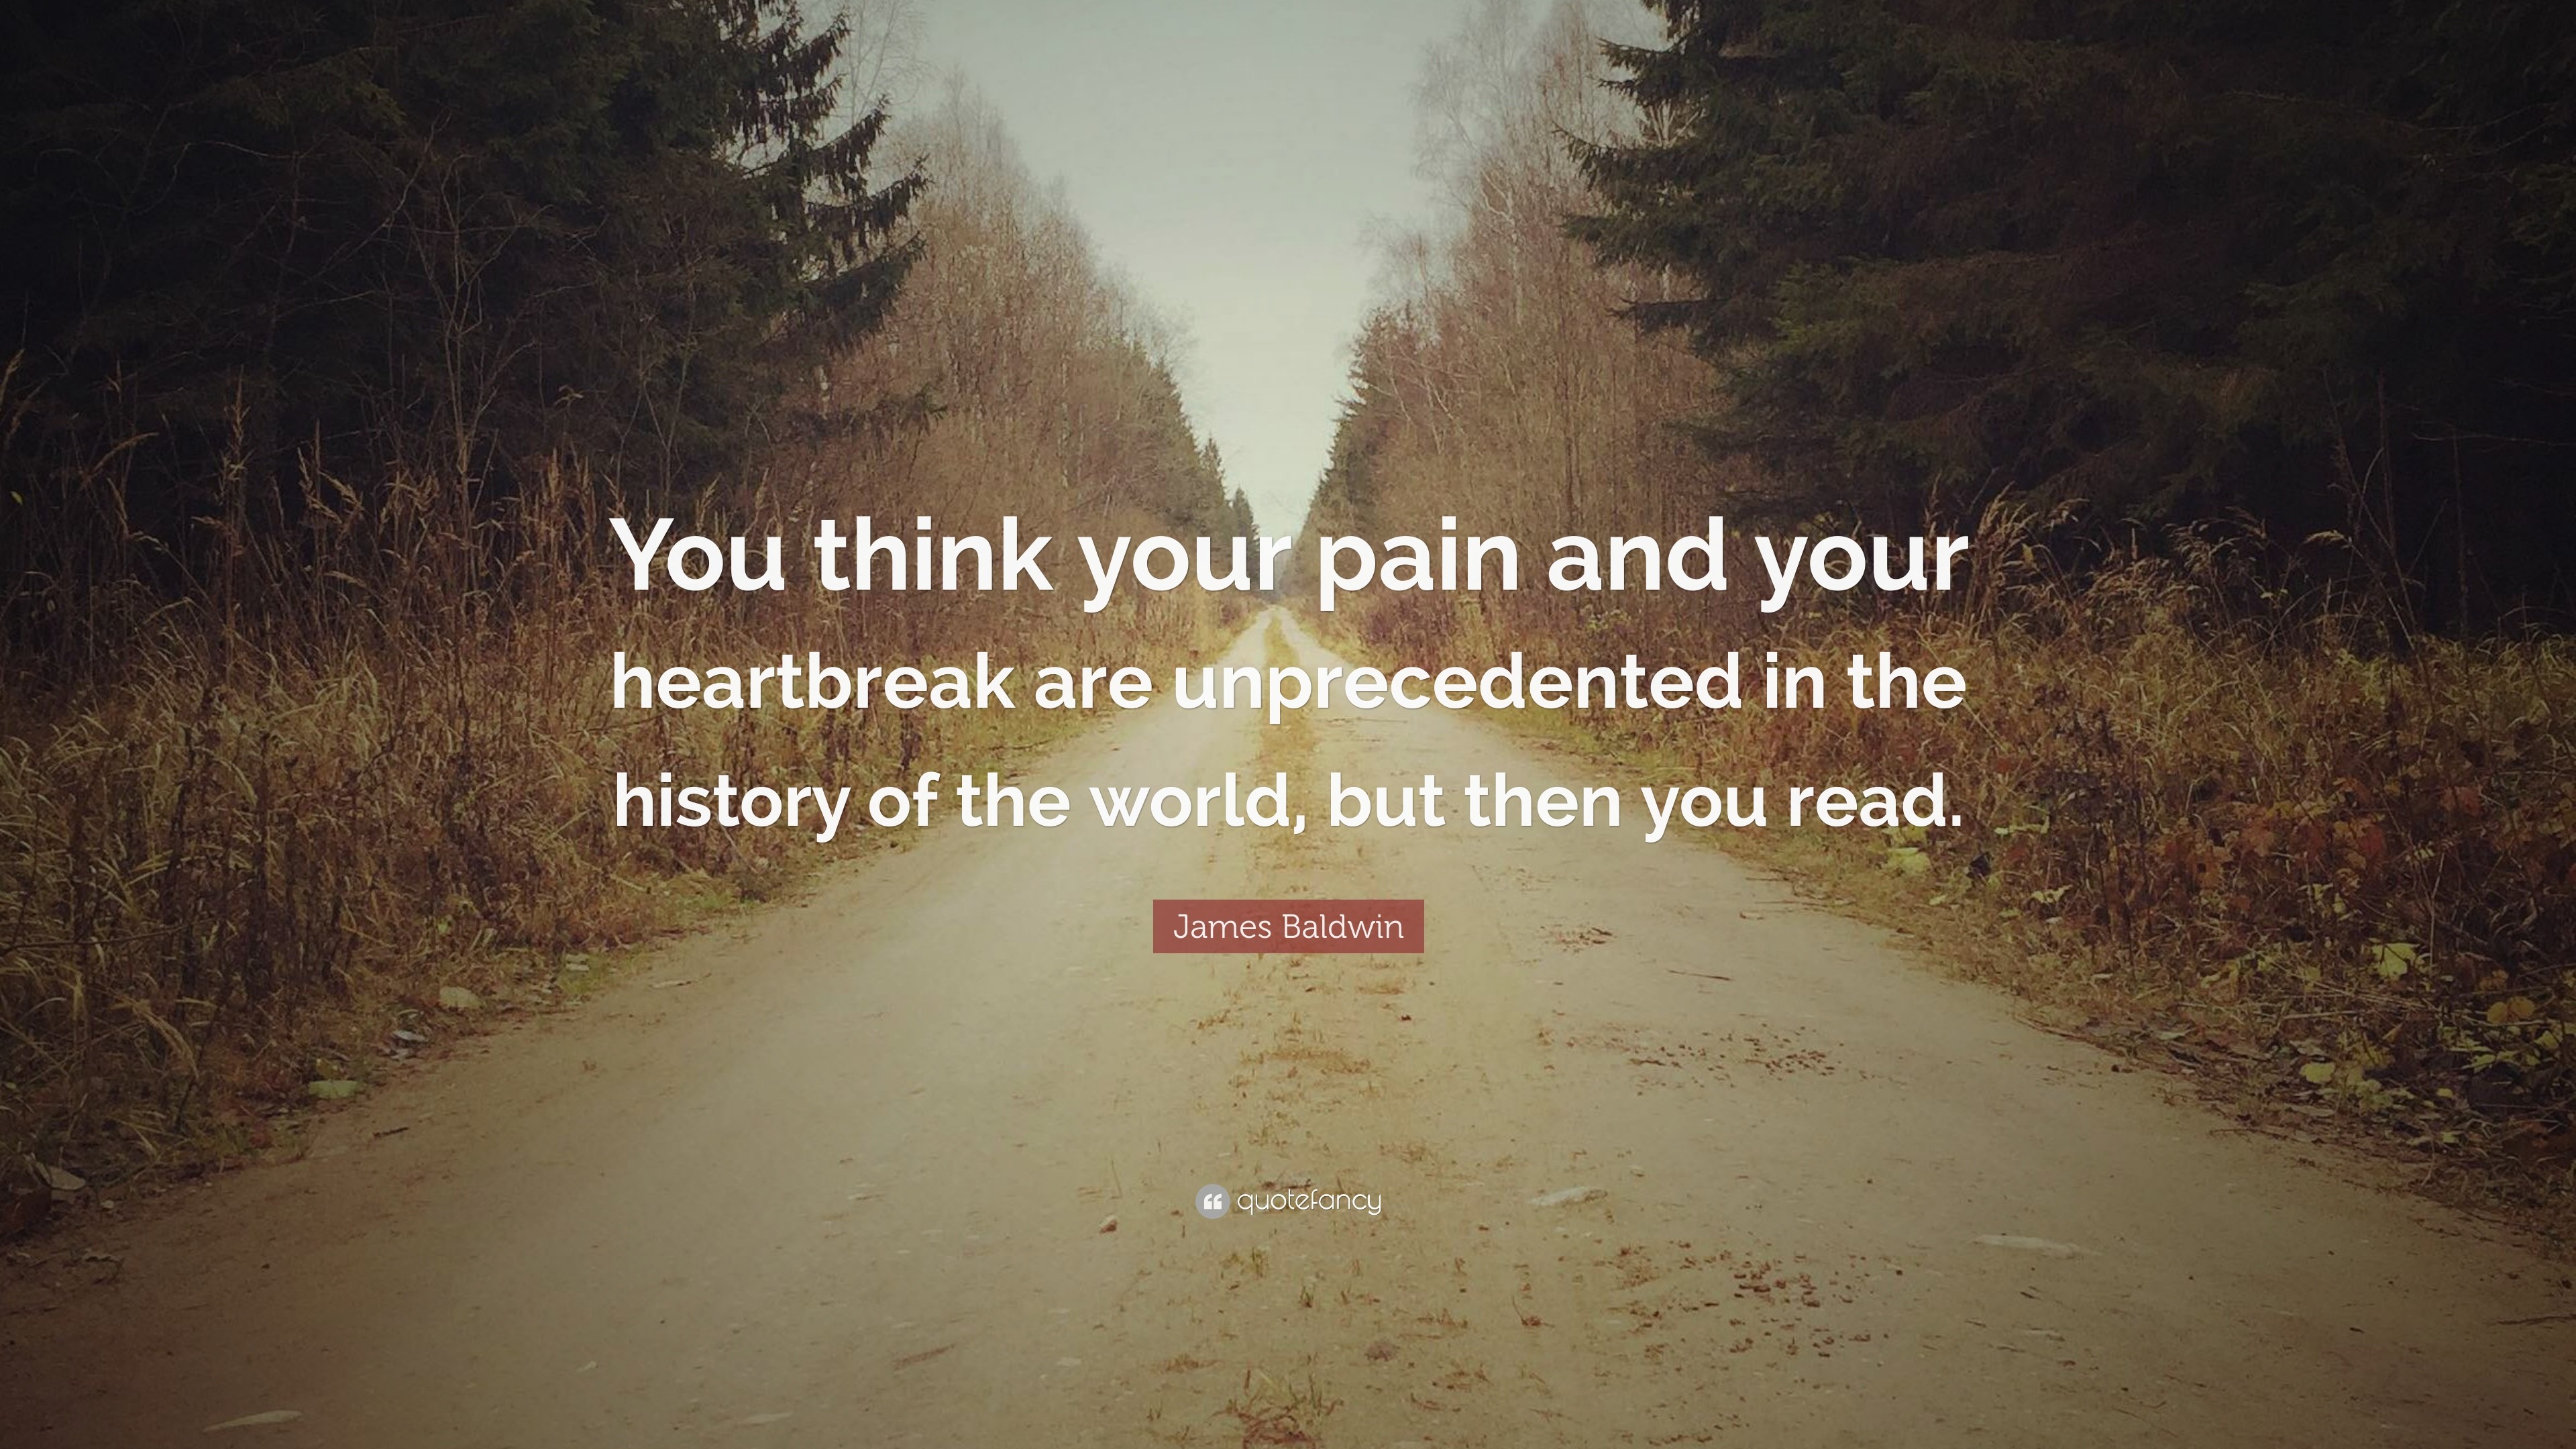 3840x2160 James Baldwin Quote: “You think your pain and your heartbreak are  unprecedented in the